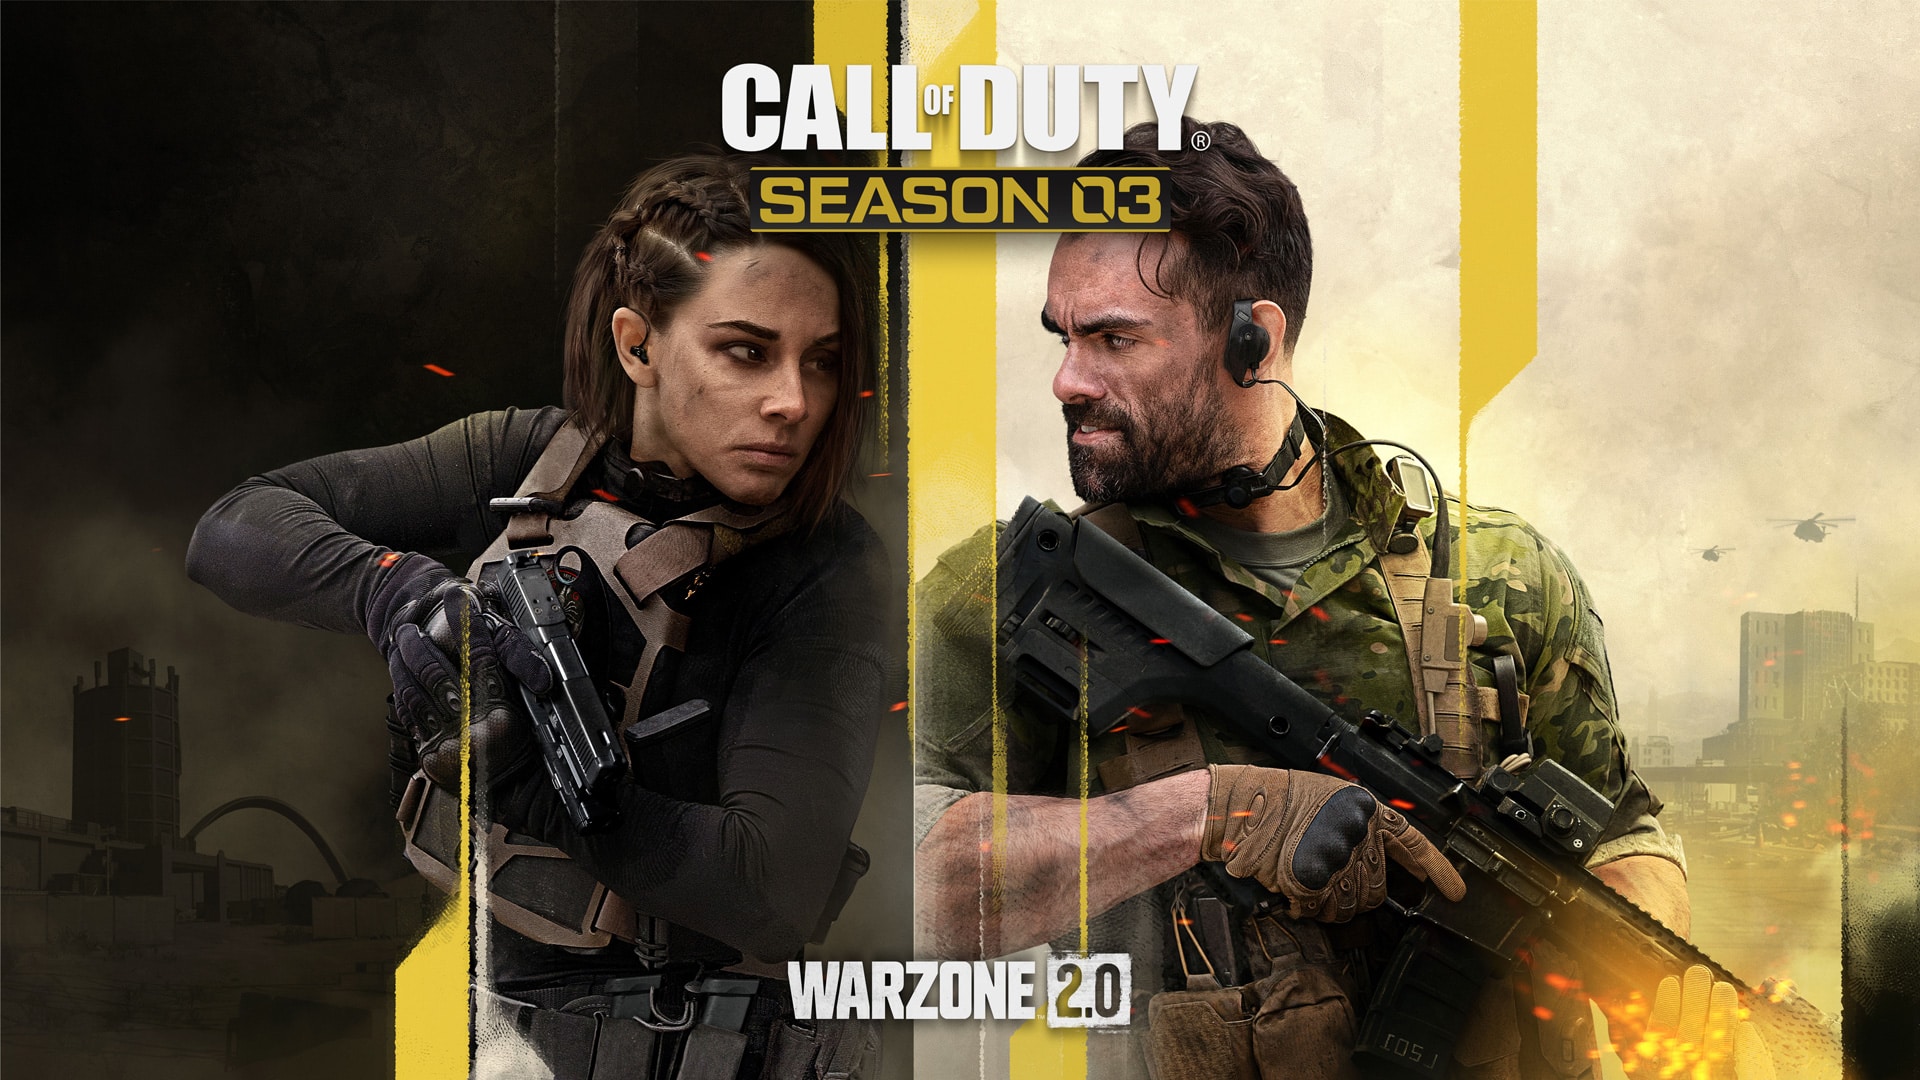 Season 03 Reloaded for Call of Duty: Modern Warfare II and Call of Duty:  Warzone 2.0: Alboran Hatchery, Raid Episode 03, Warzone Ranked Play, and  More